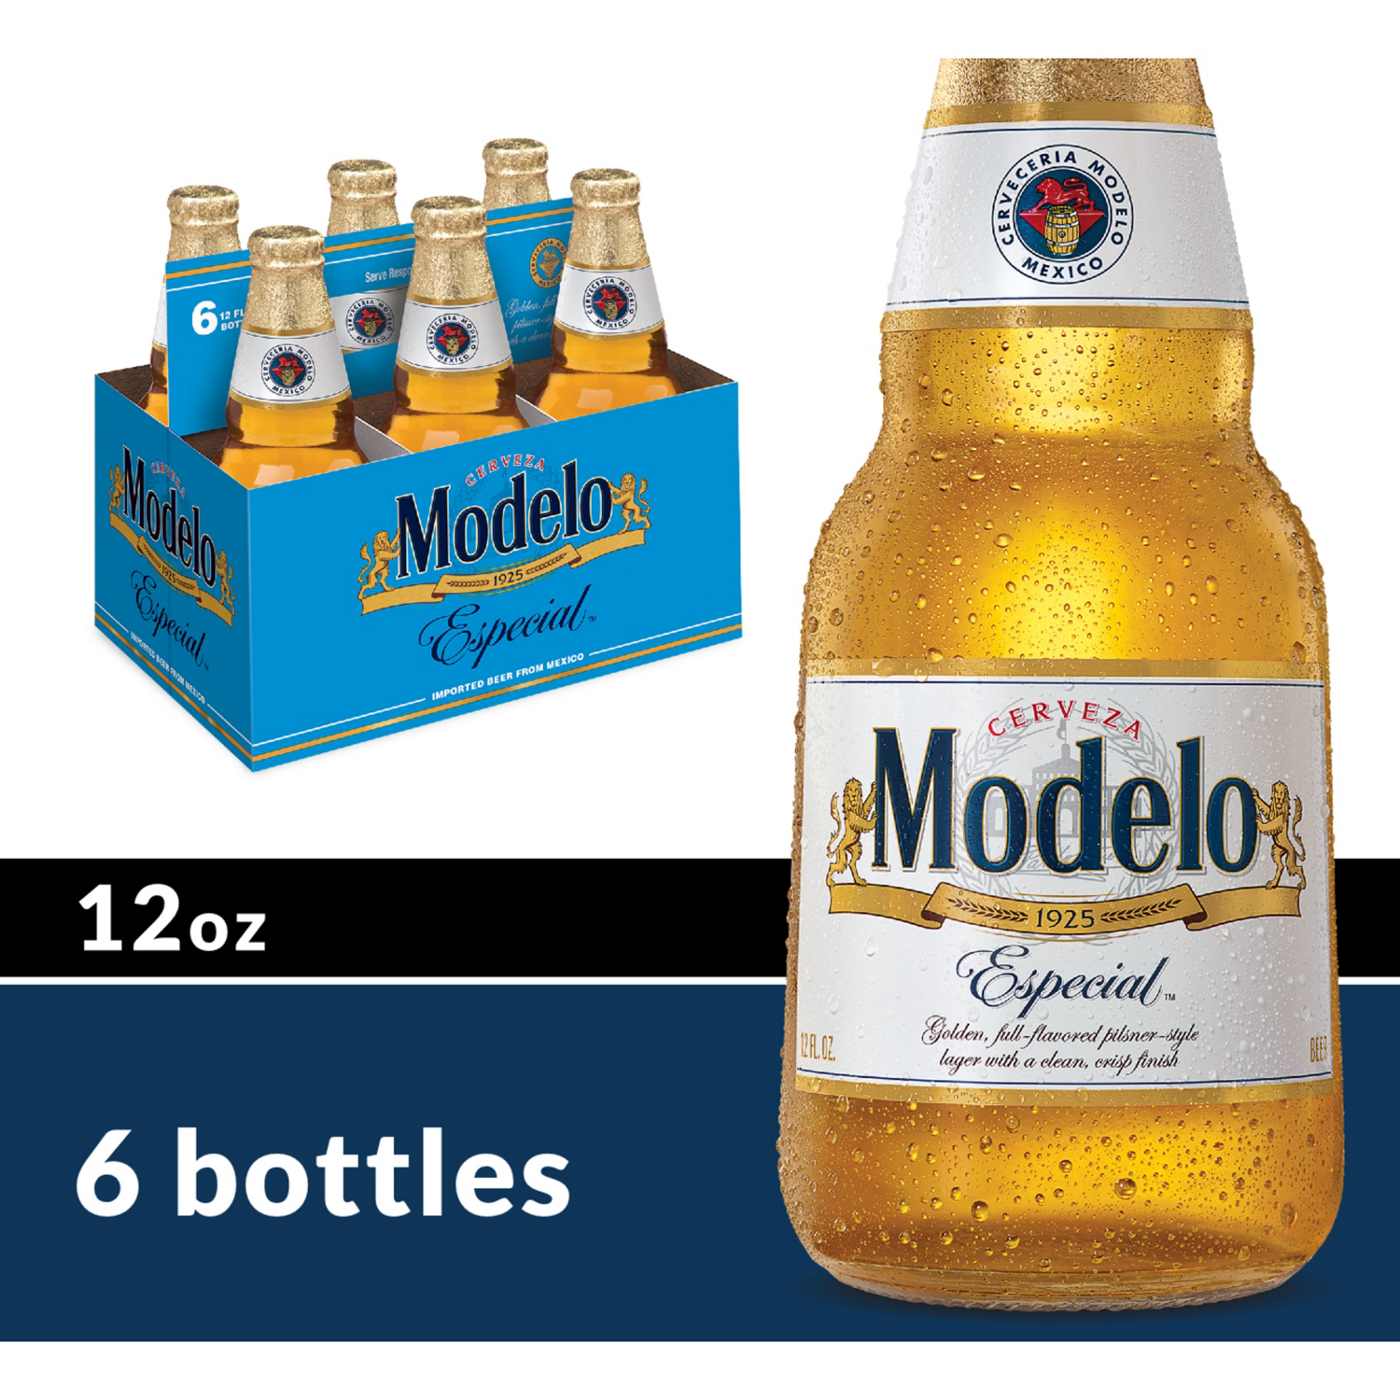 Modelo Especial Mexican Lager Import Beer 12 oz Bottles, 6 pk; image 3 of 10